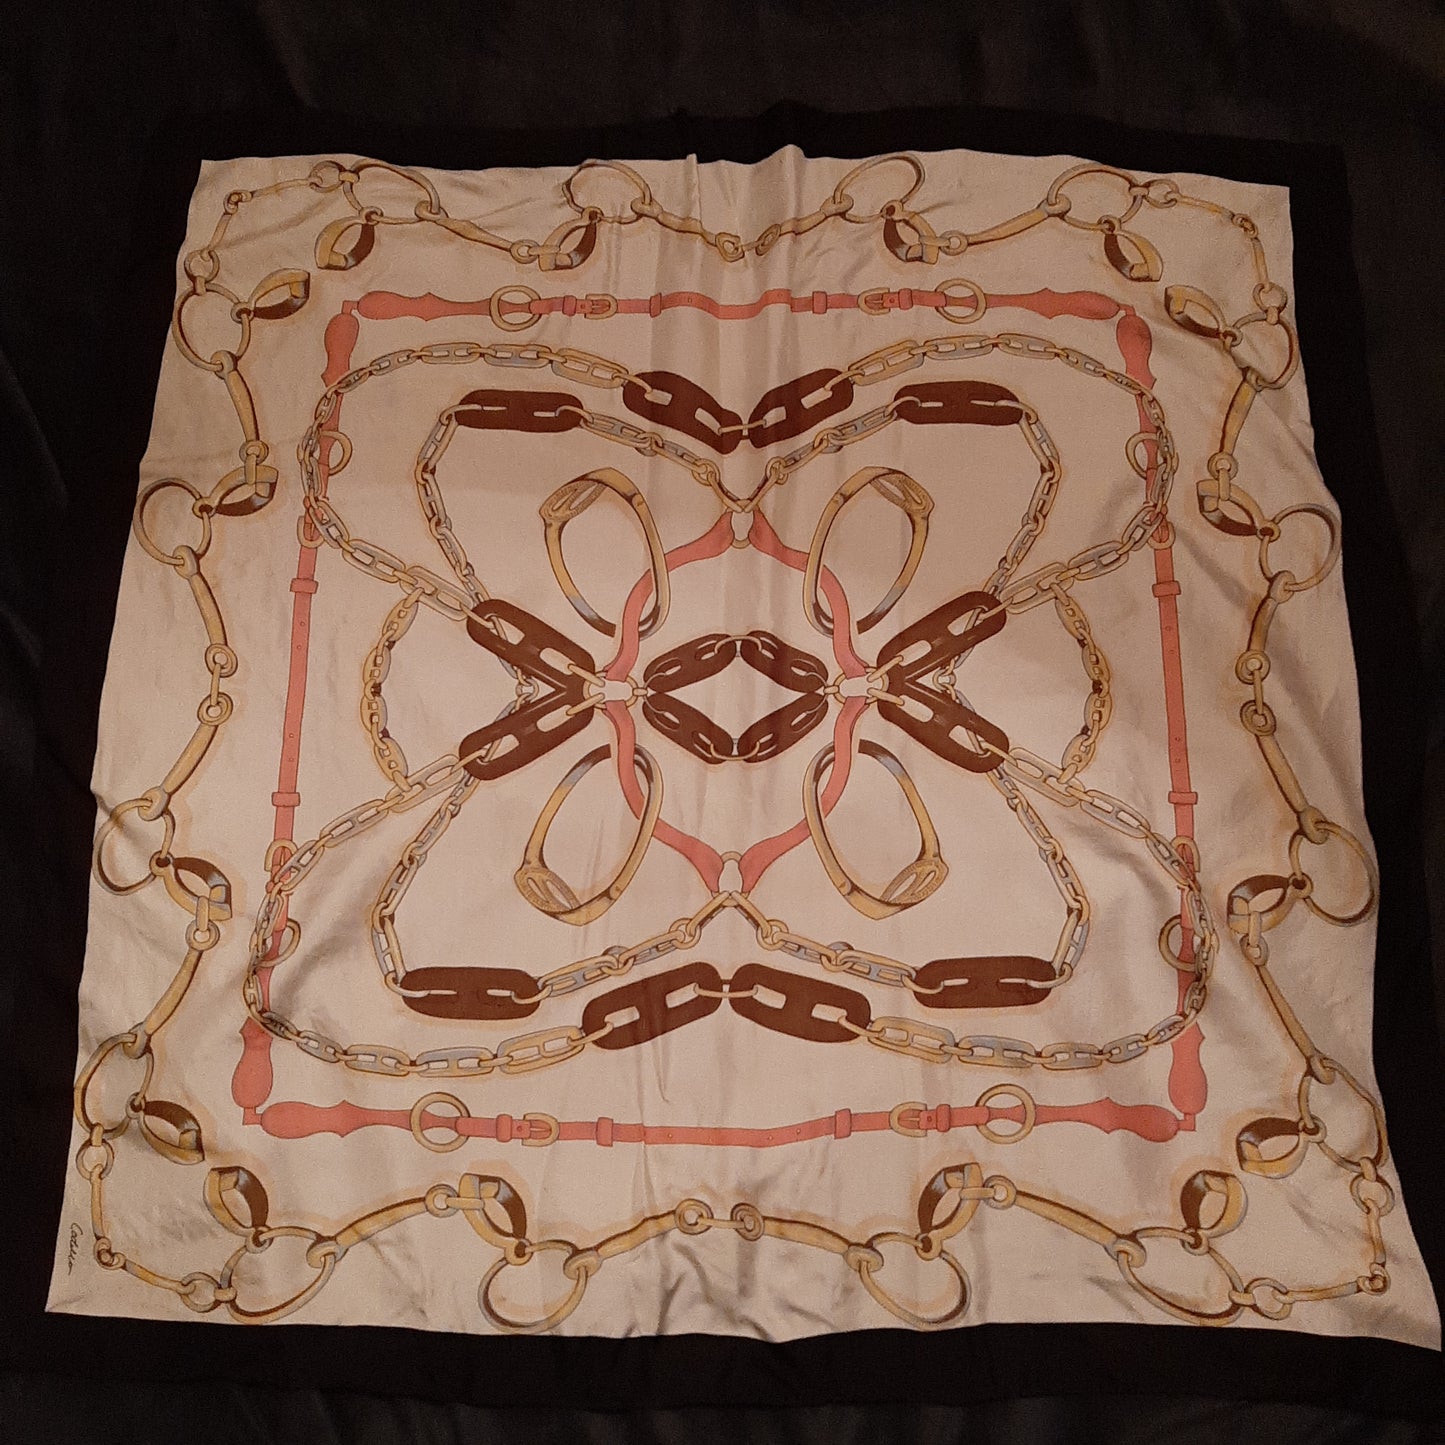 Cream scarf with buckles and belt motif